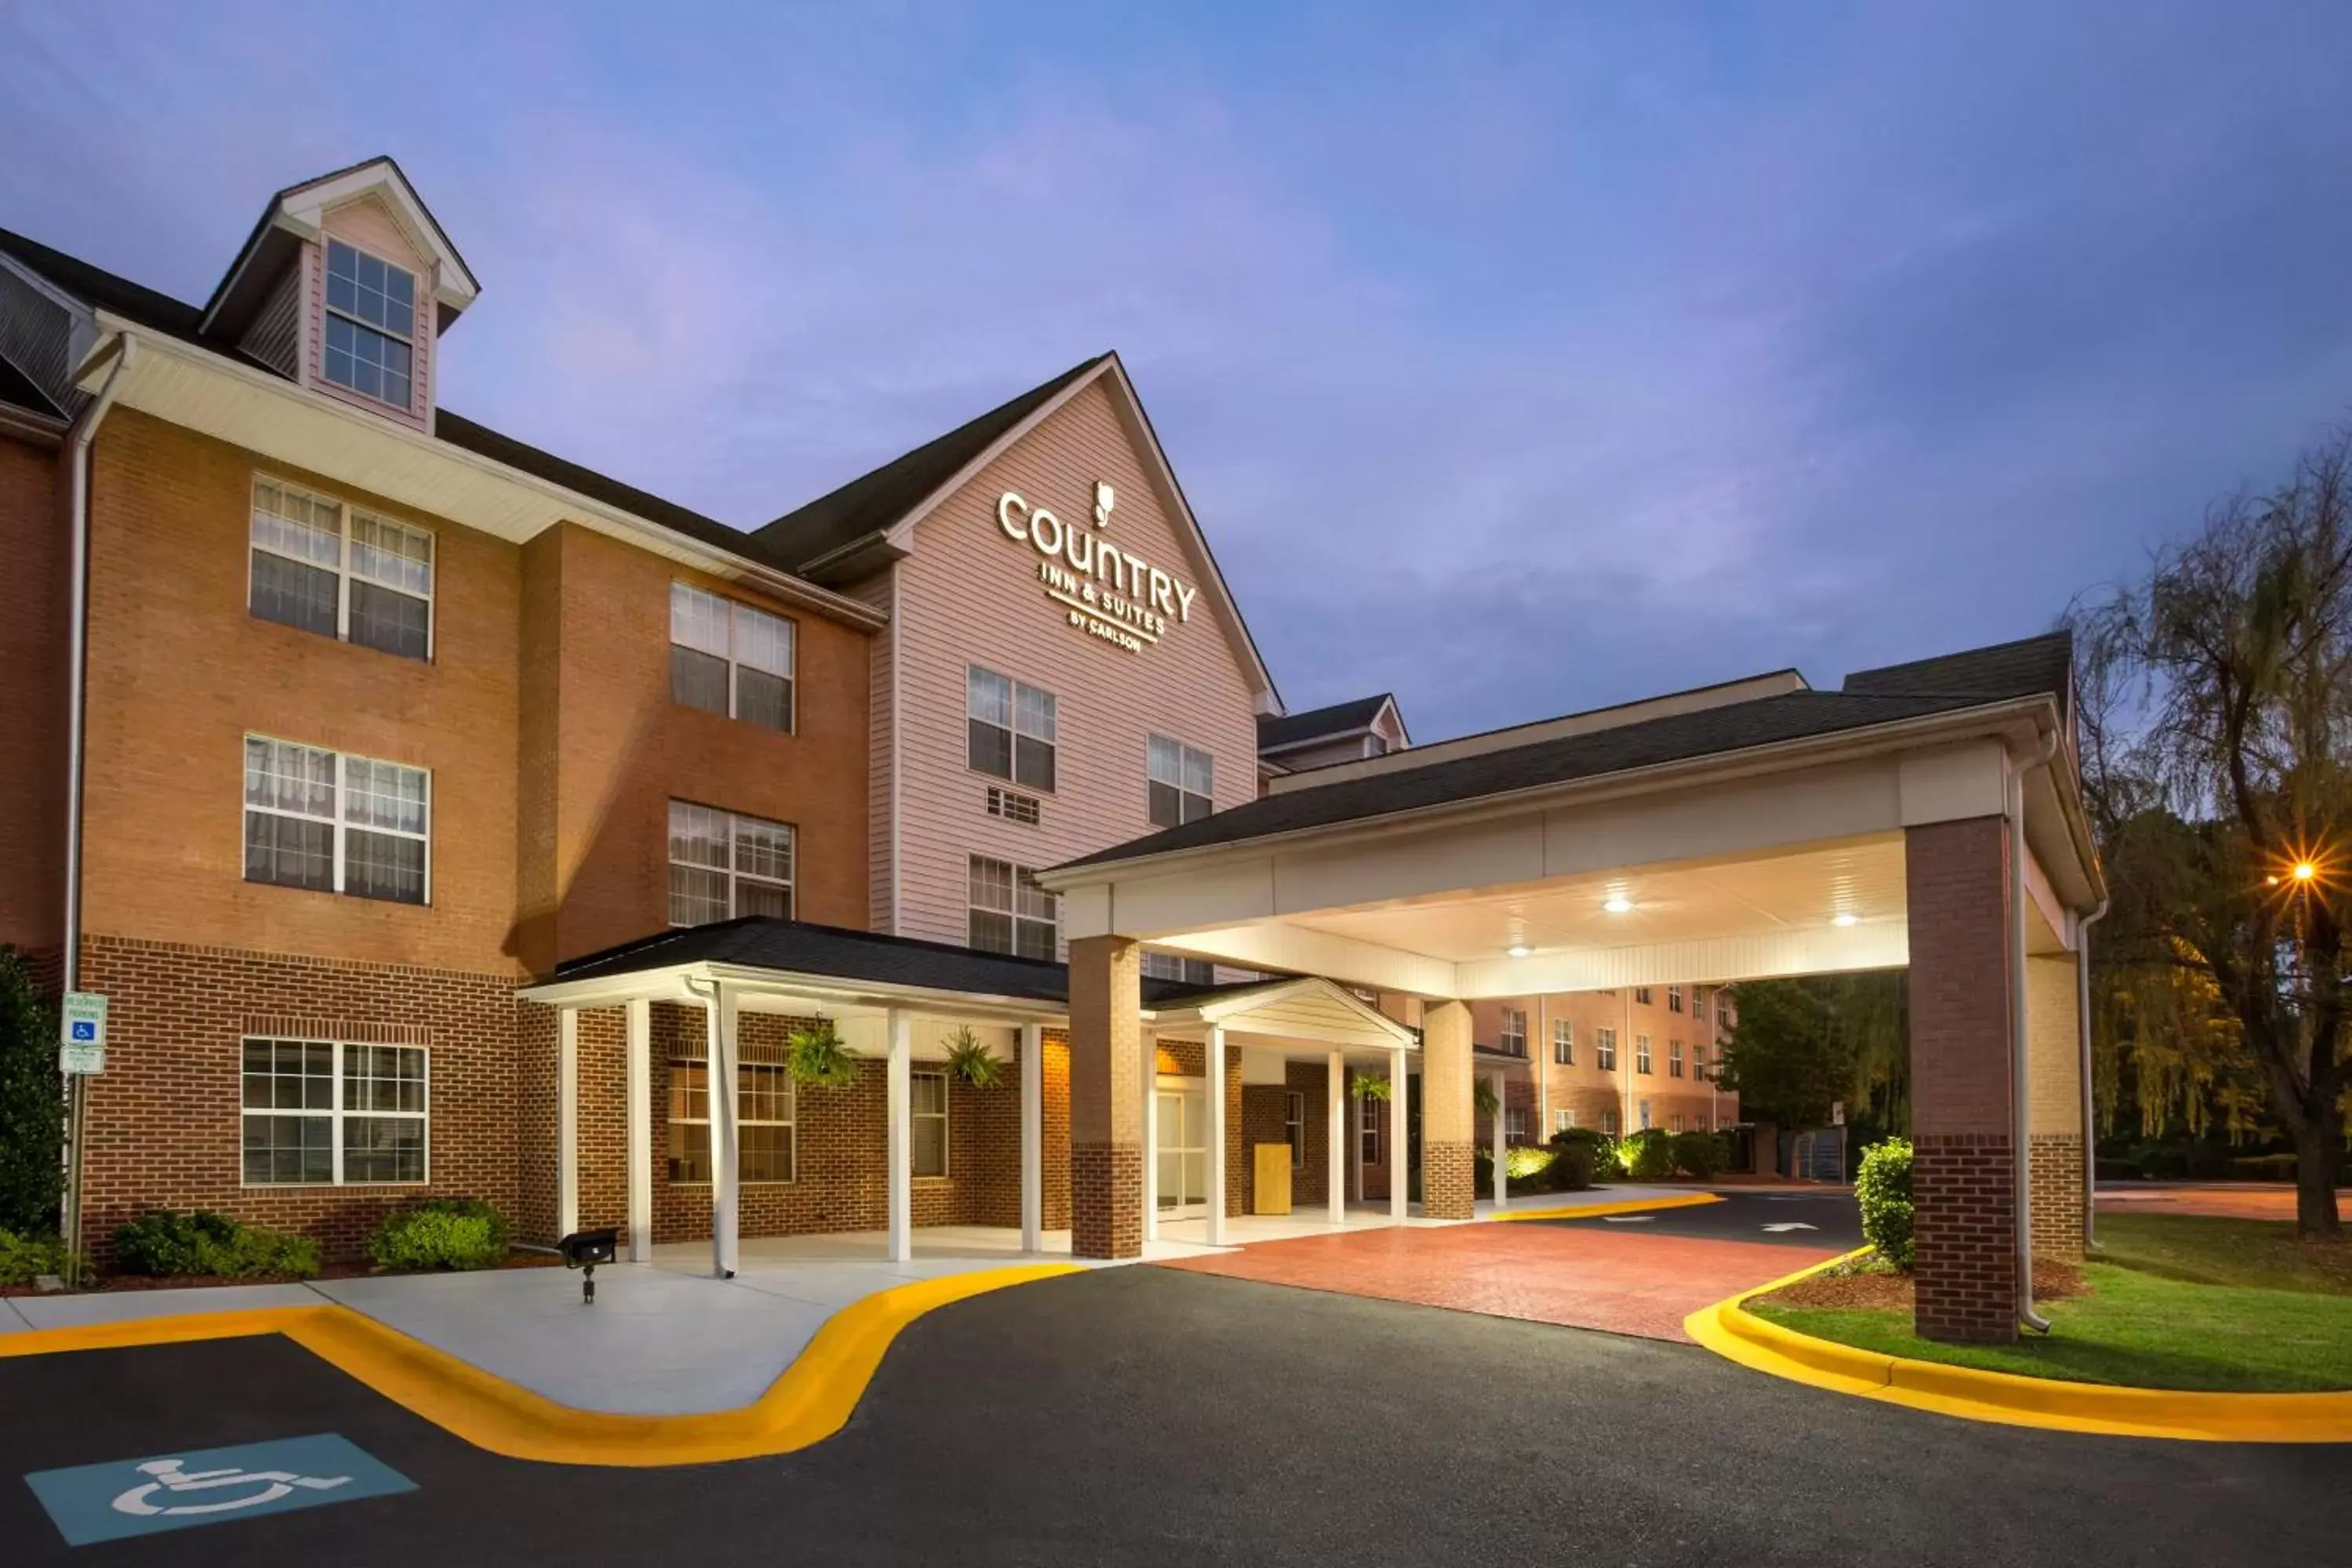 Property building, Facade/Entrance in Country Inn & Suites by Radisson, Charlotte University Place, NC